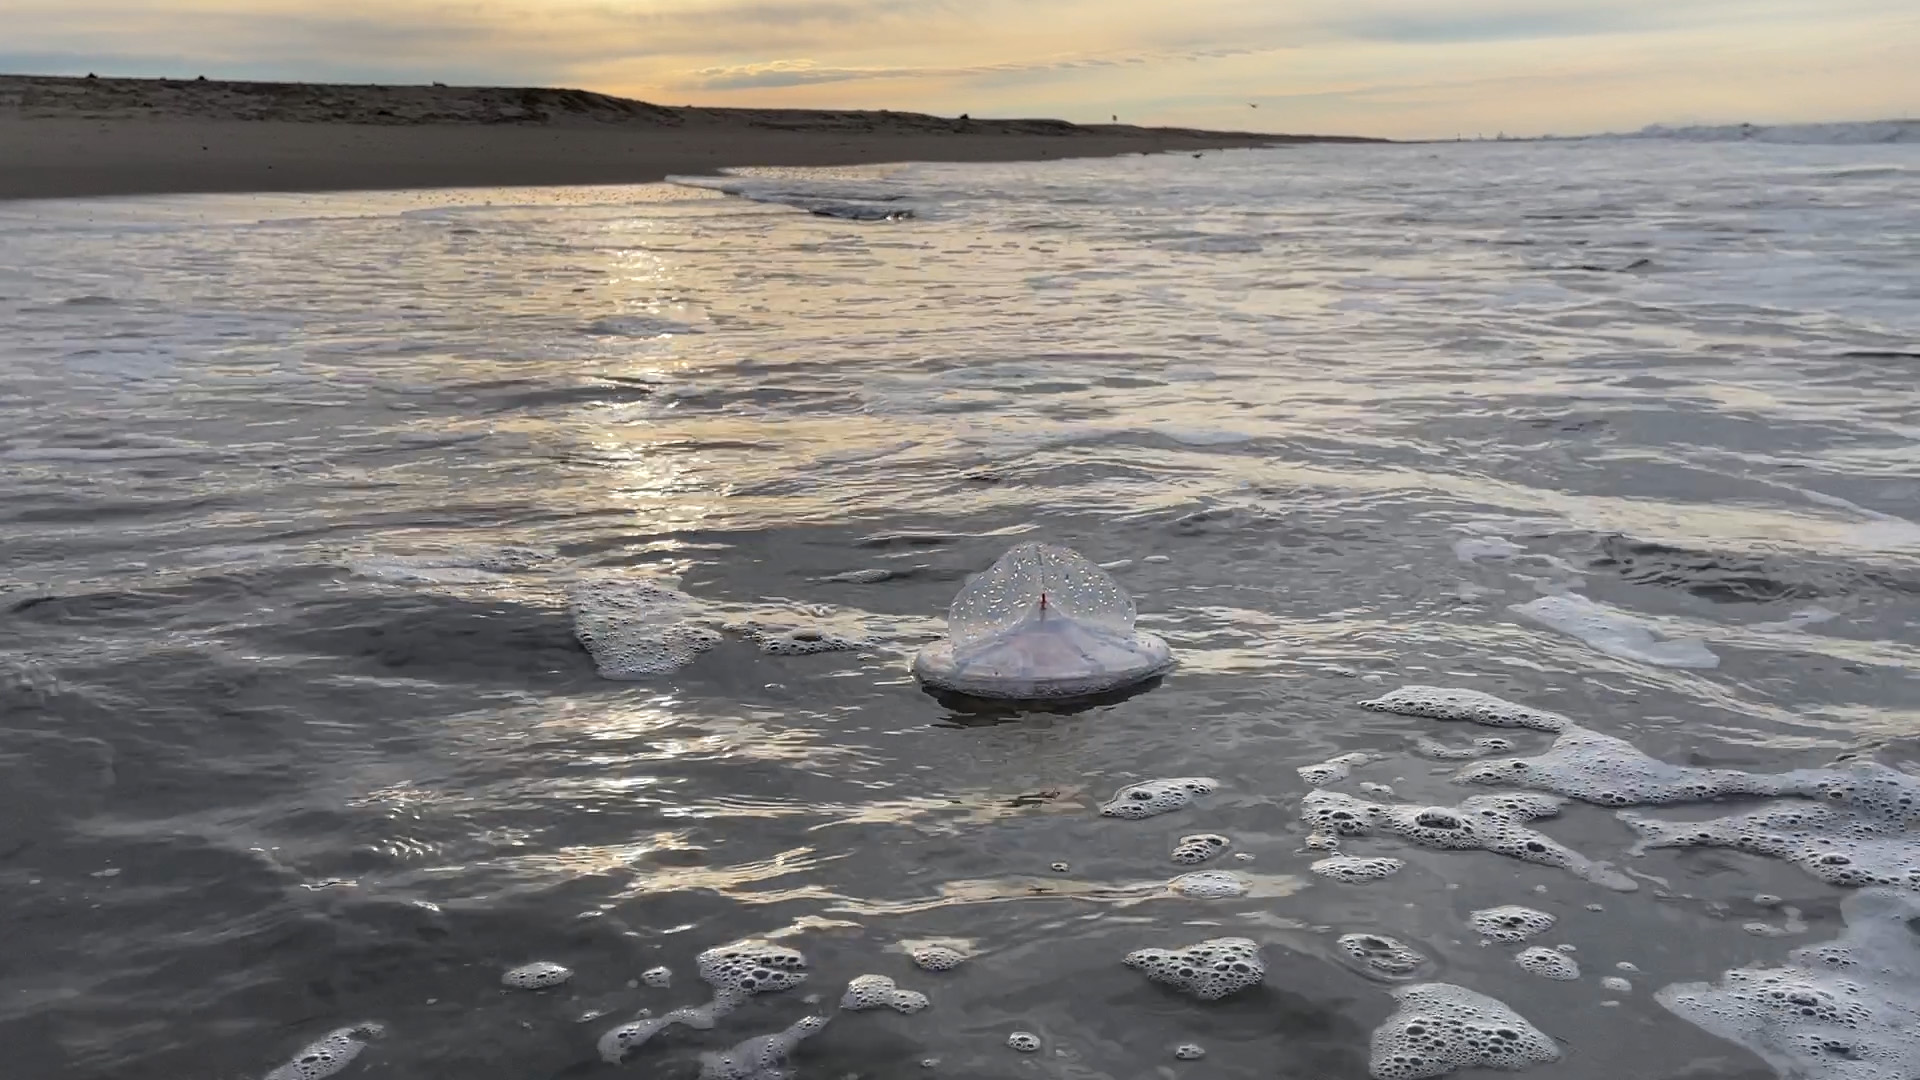 Prototype of a Velella sensor is tested in the Pacific Ocean